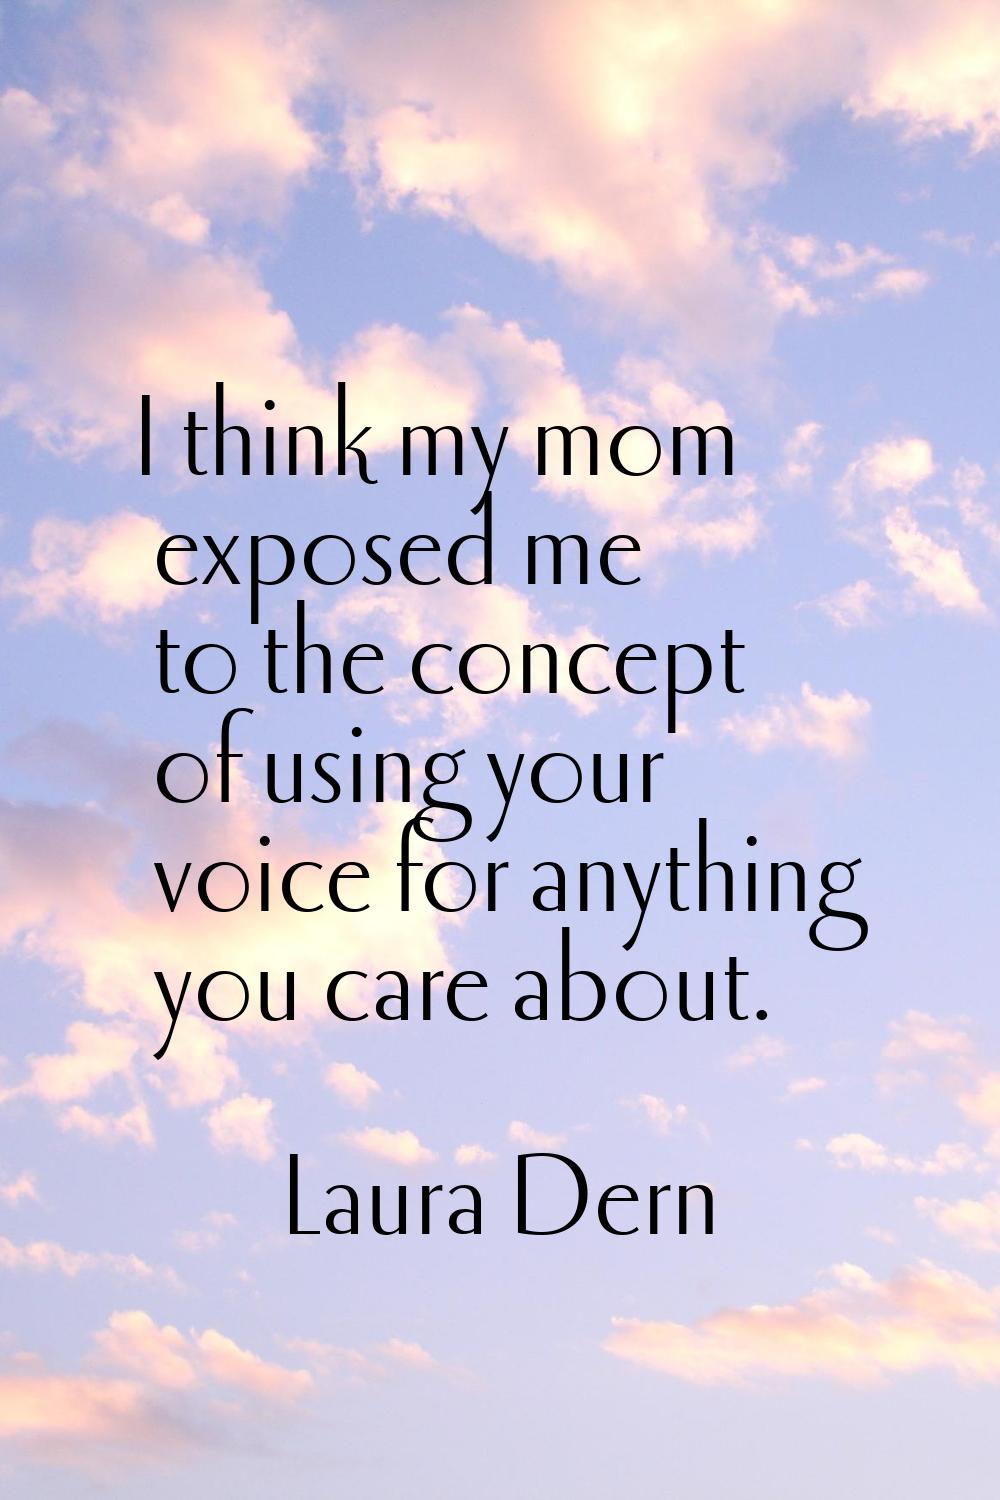 I think my mom exposed me to the concept of using your voice for anything you care about.